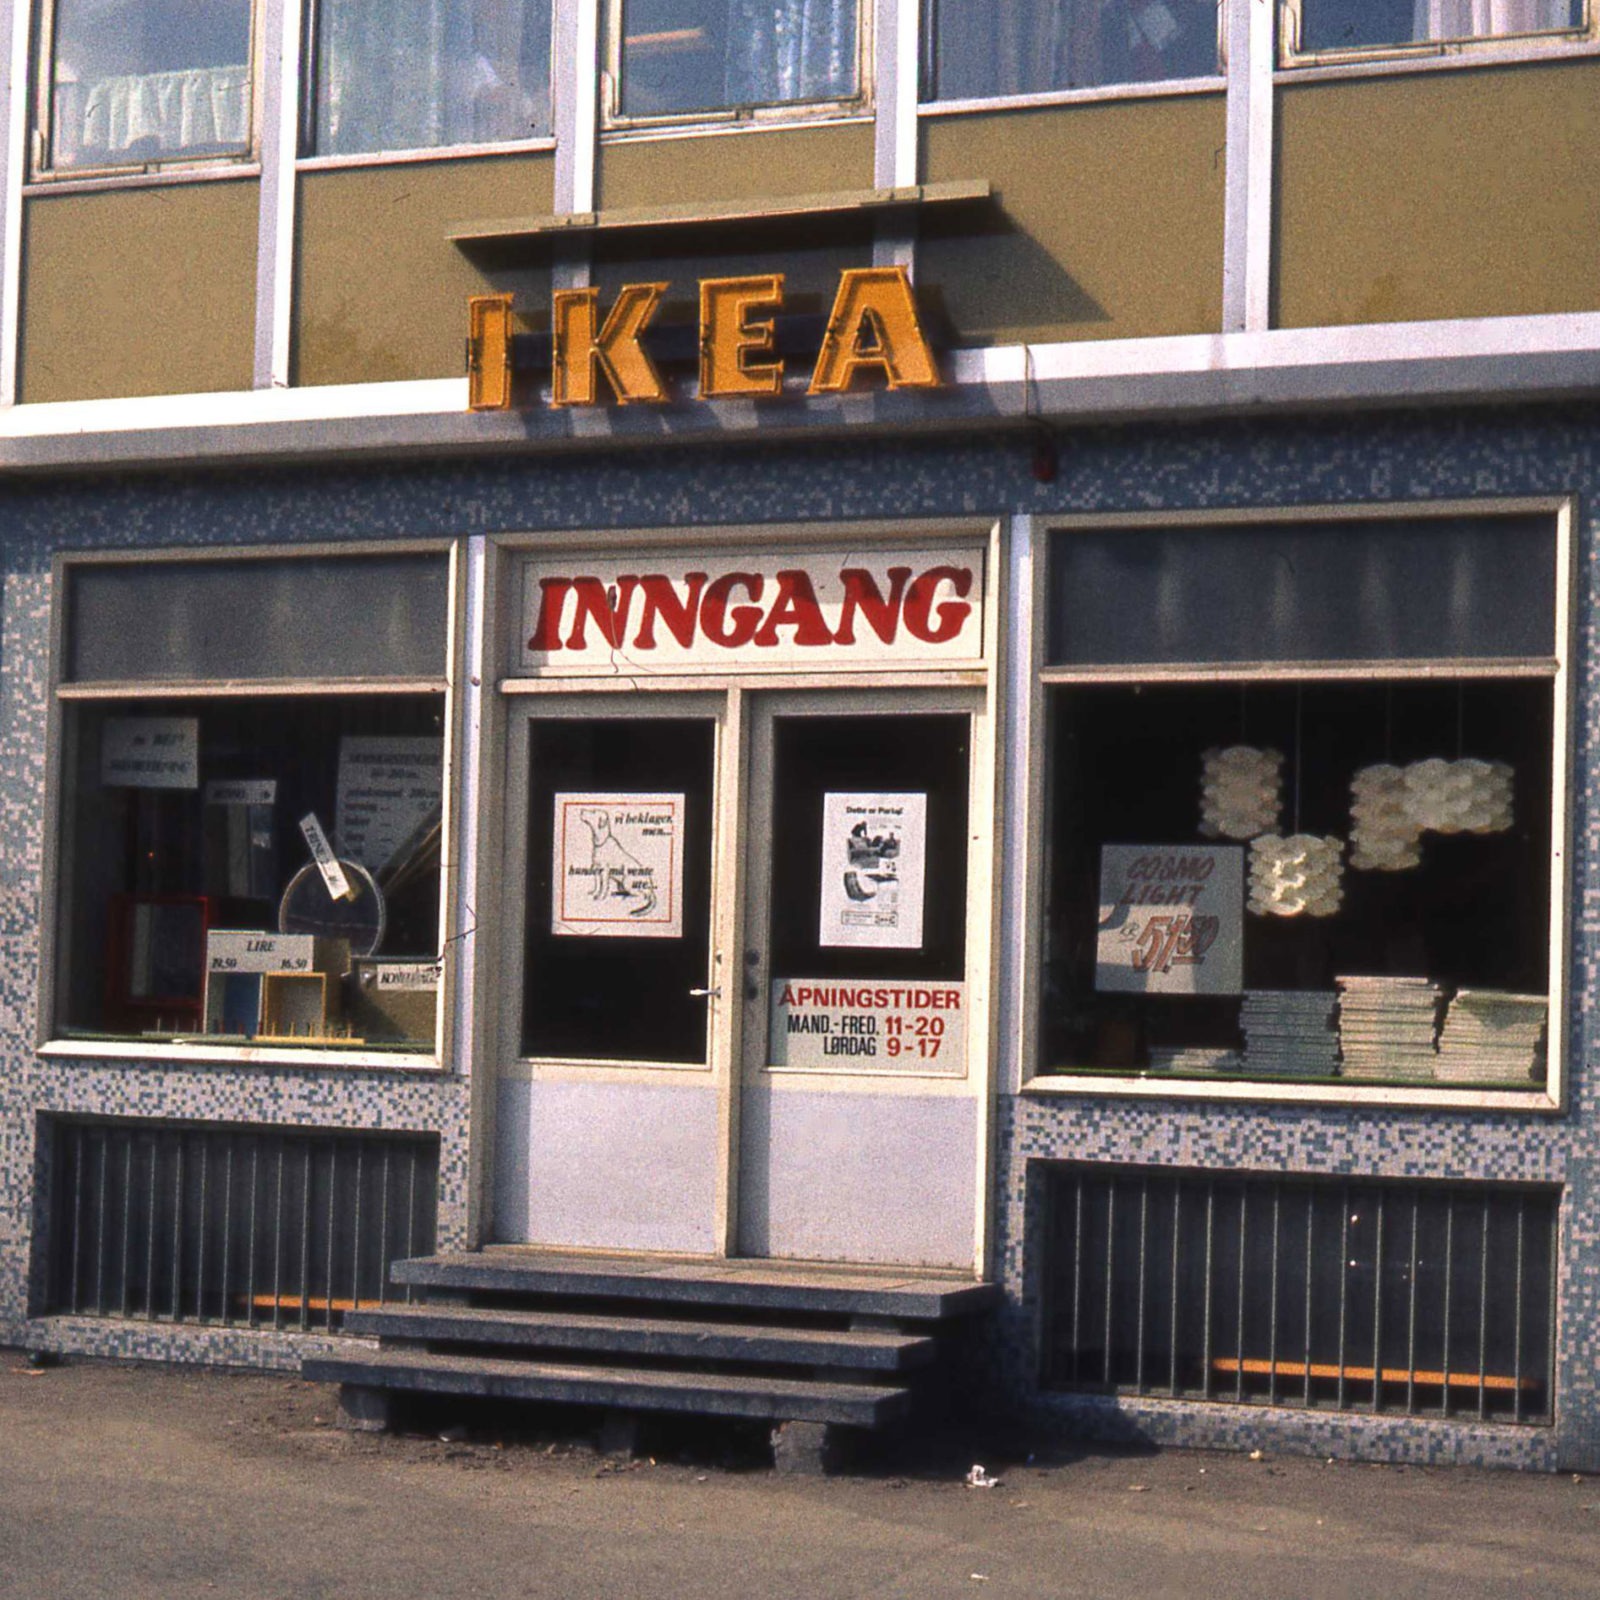 Entrance IKEA store in Norway, 1960s. Yellow IKEA sign above door. Lamps and catalogue stacks visible in shop windows.